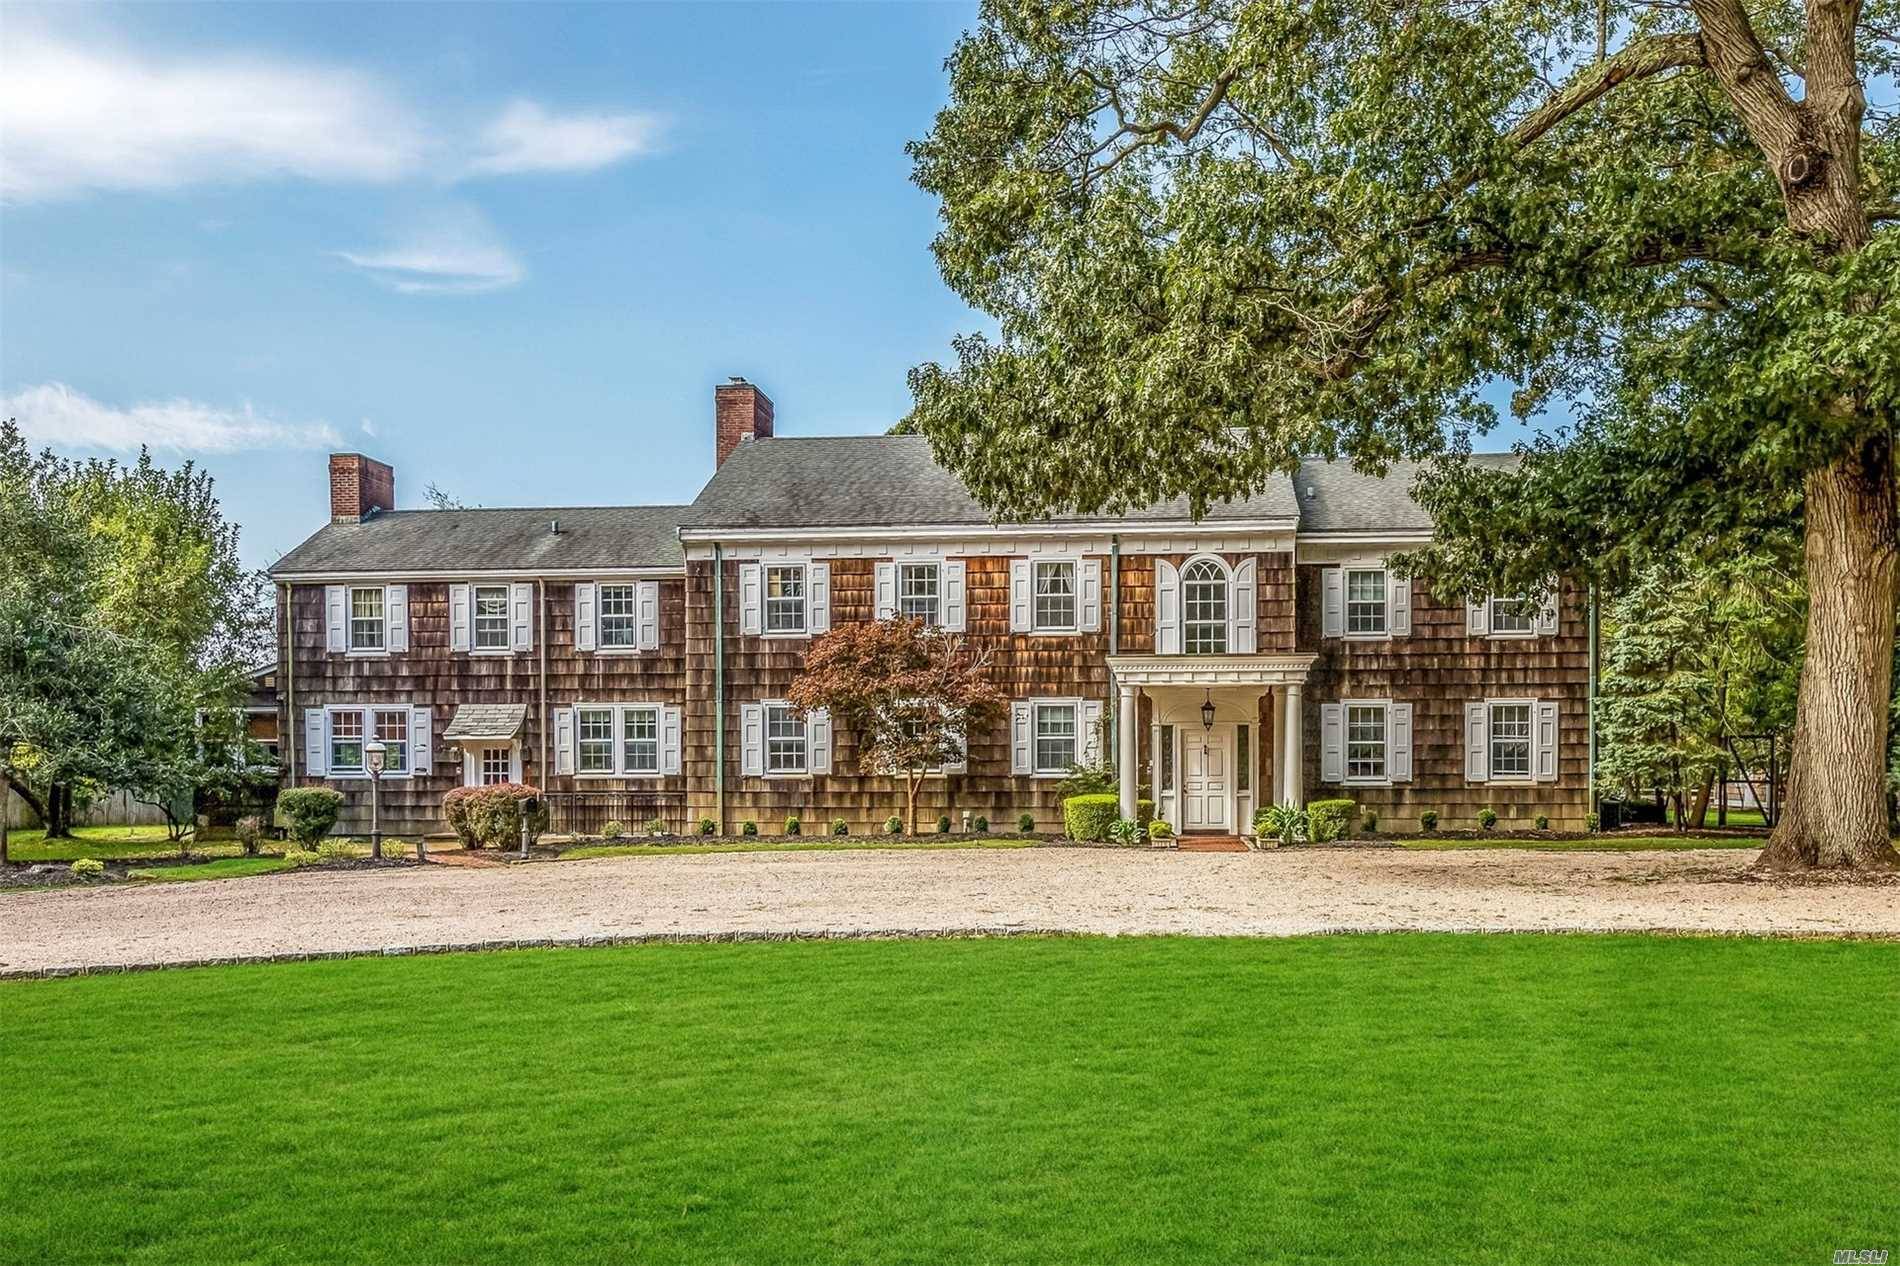 Secluded & Private Comes To Mind As You Enter This Spectacular Georgian Colonial Nestled On 3.